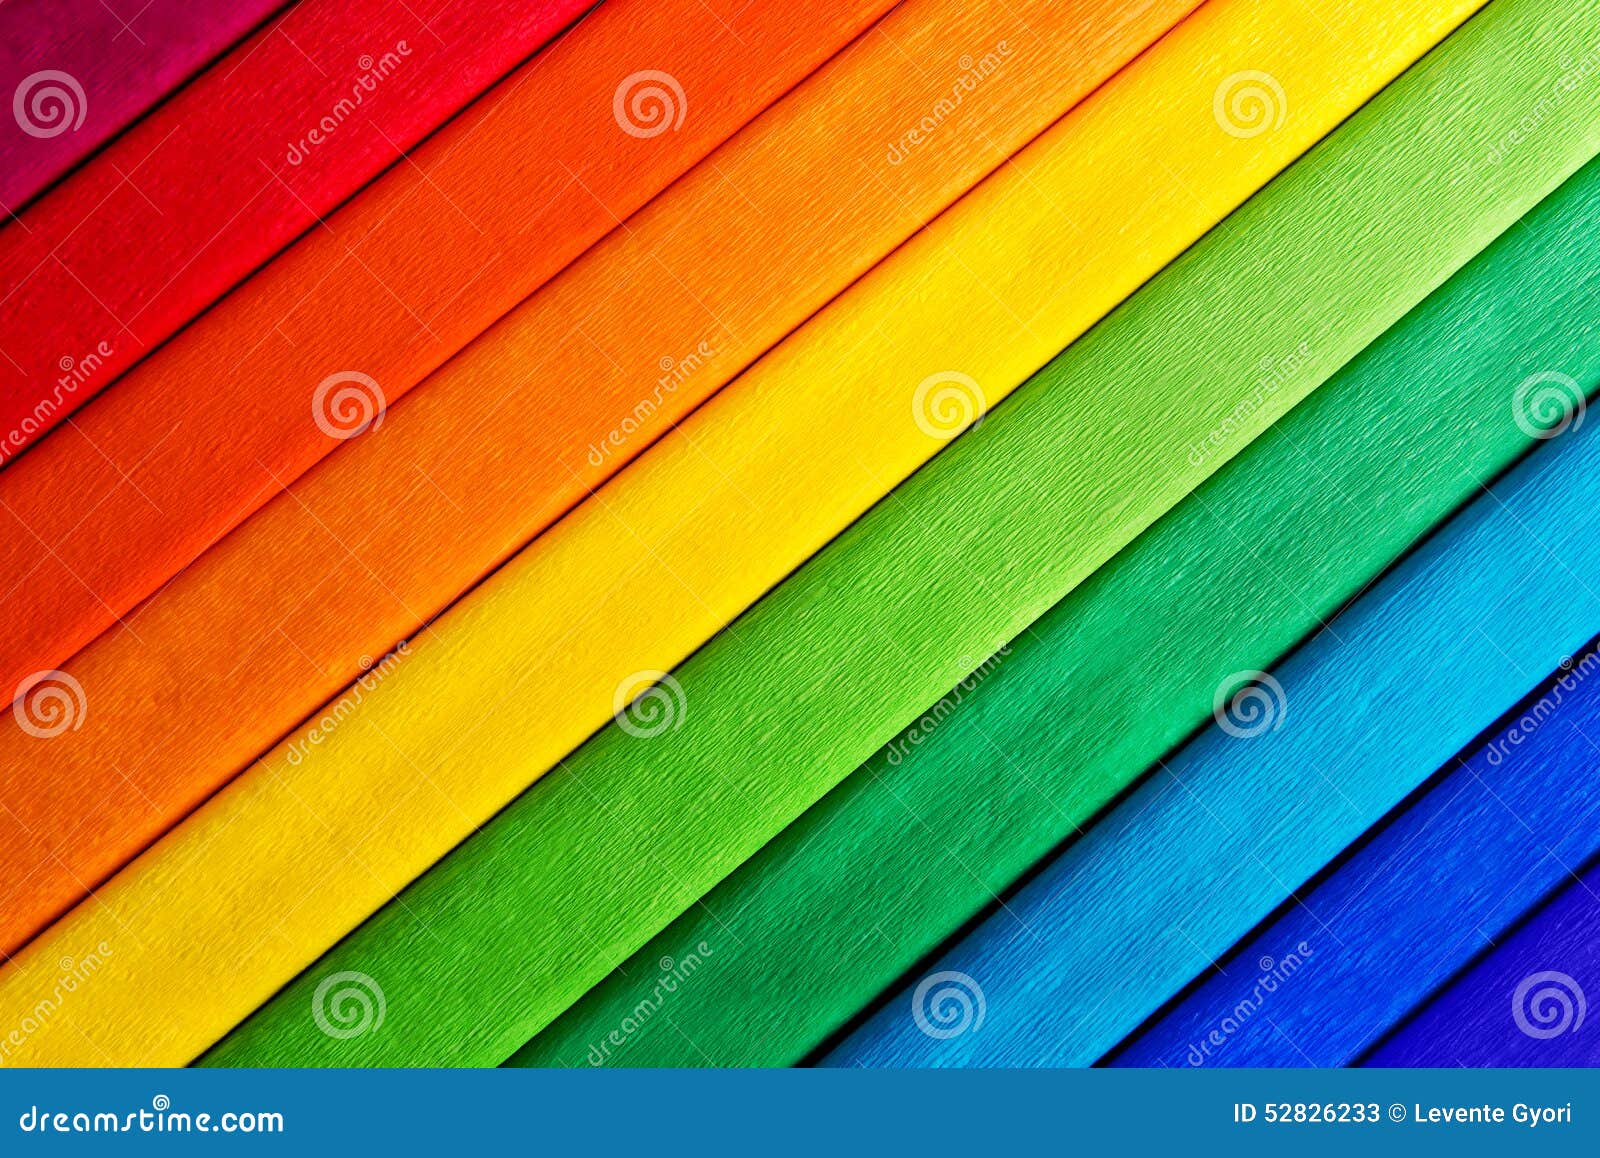 abstract colorful multicolor background